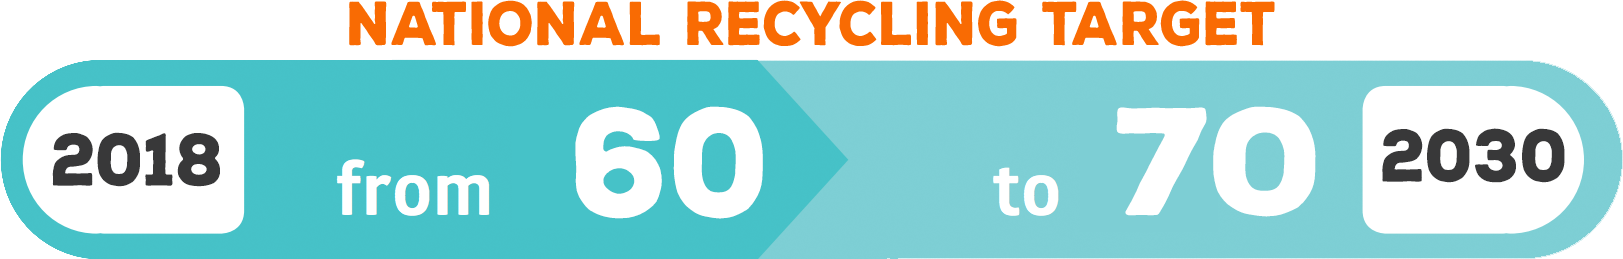 Our recycling targets for 2030